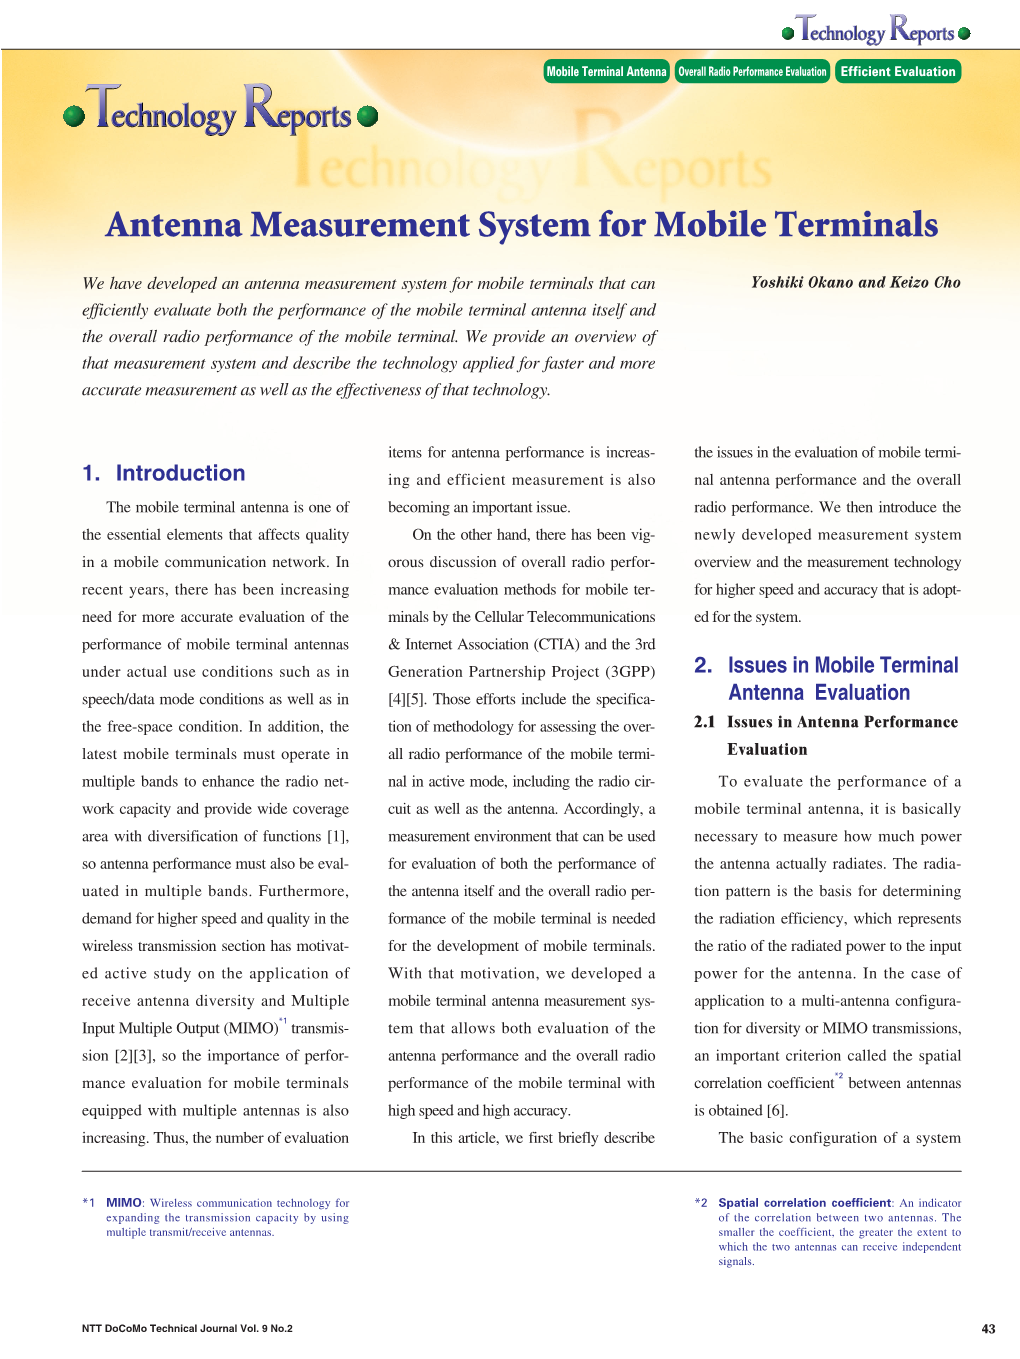 Antenna Measurement System for Mobile Terminals